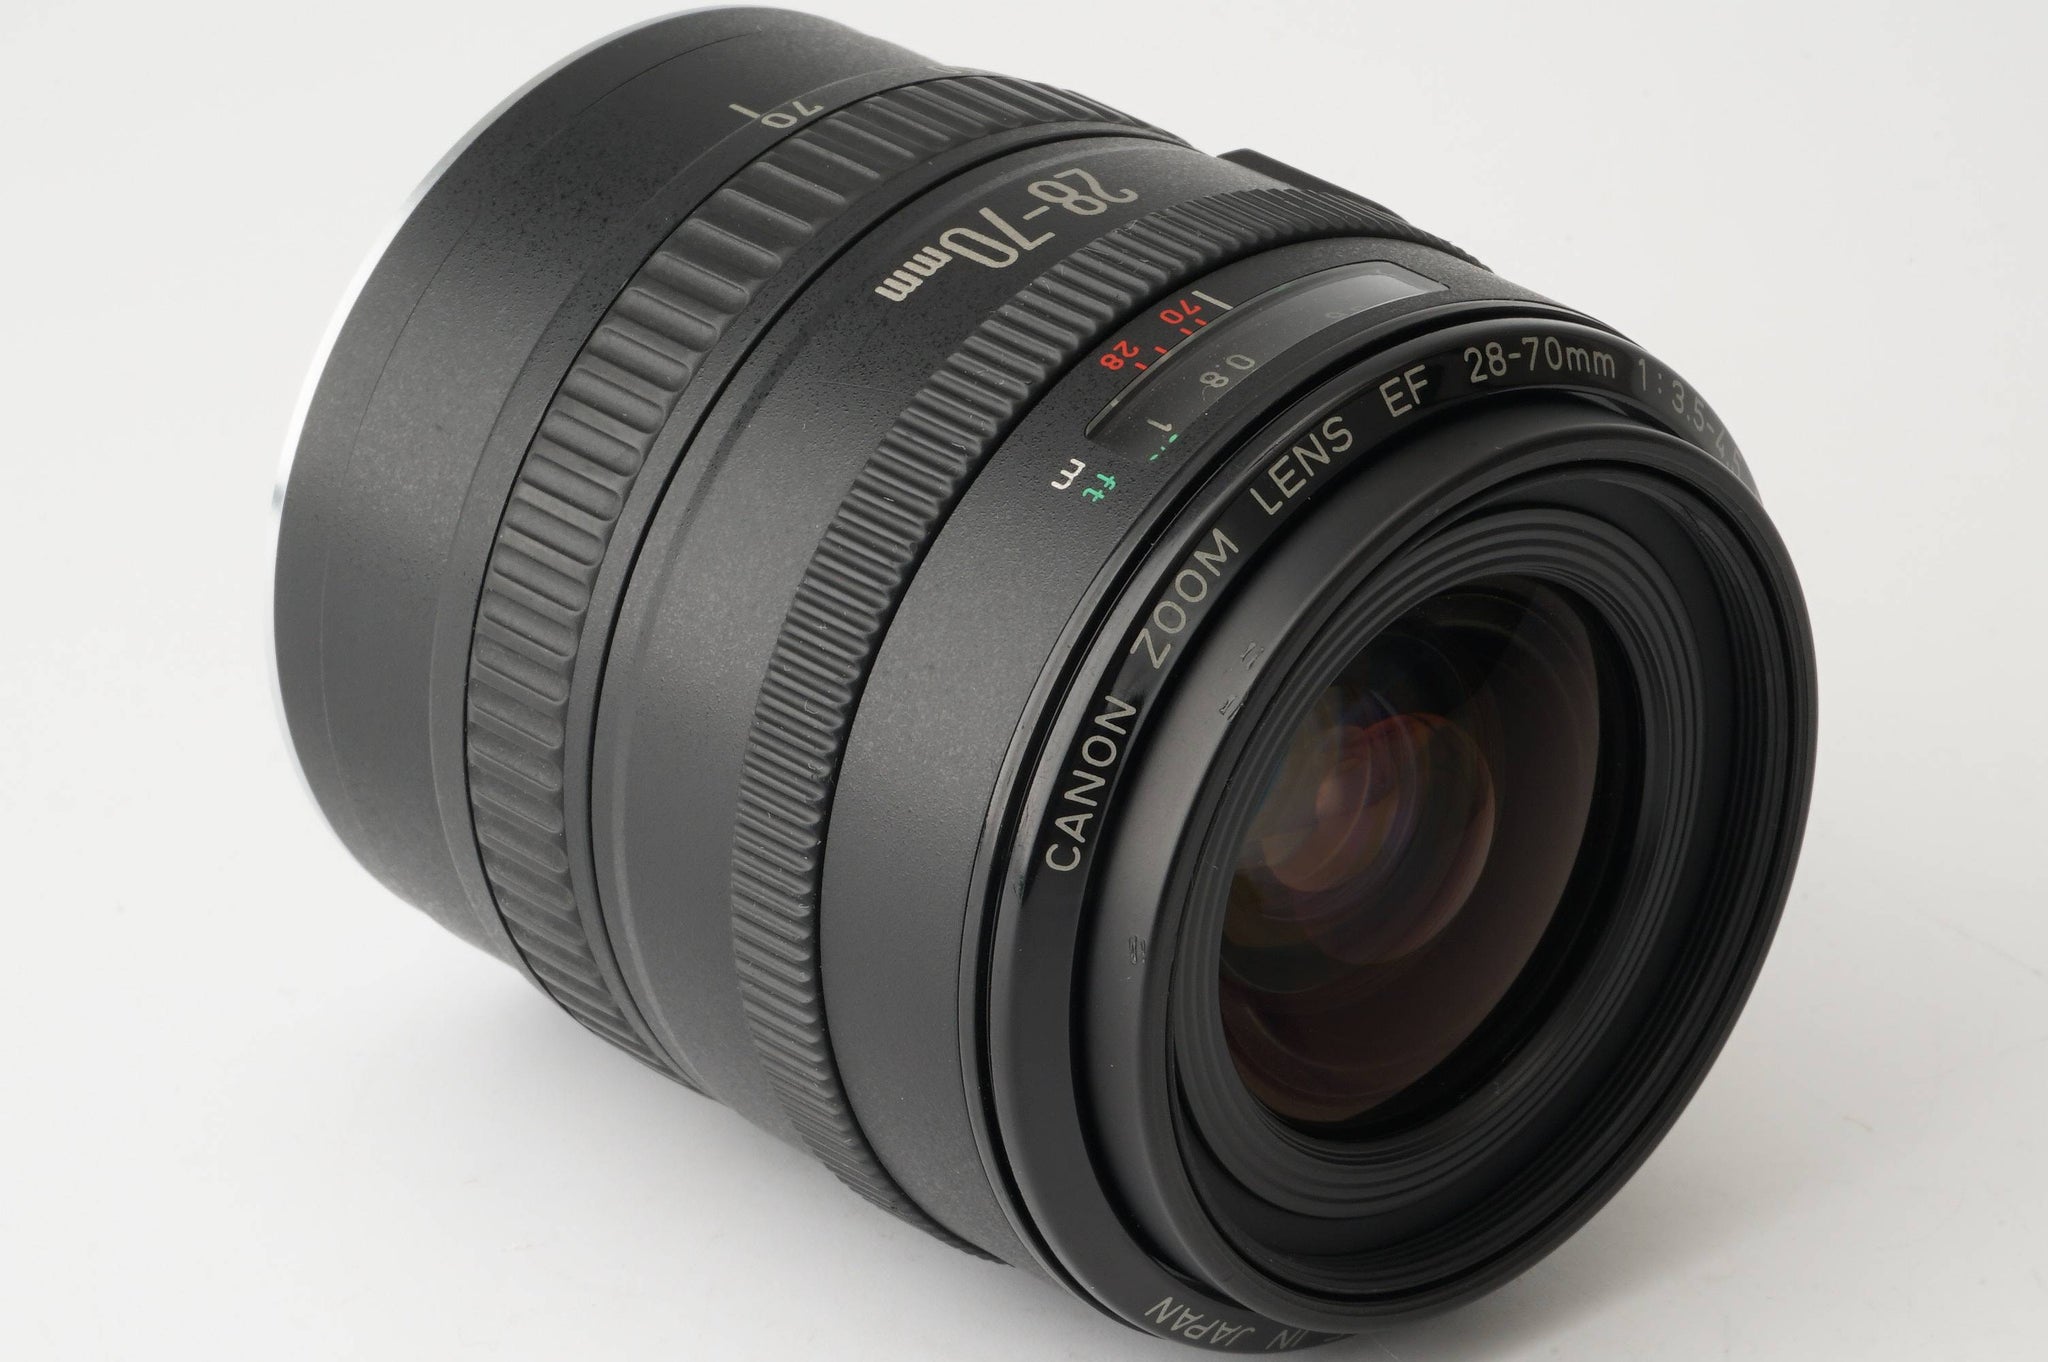 CANON ZOOM LENS EF 28-70mm 1:3.5-4.5